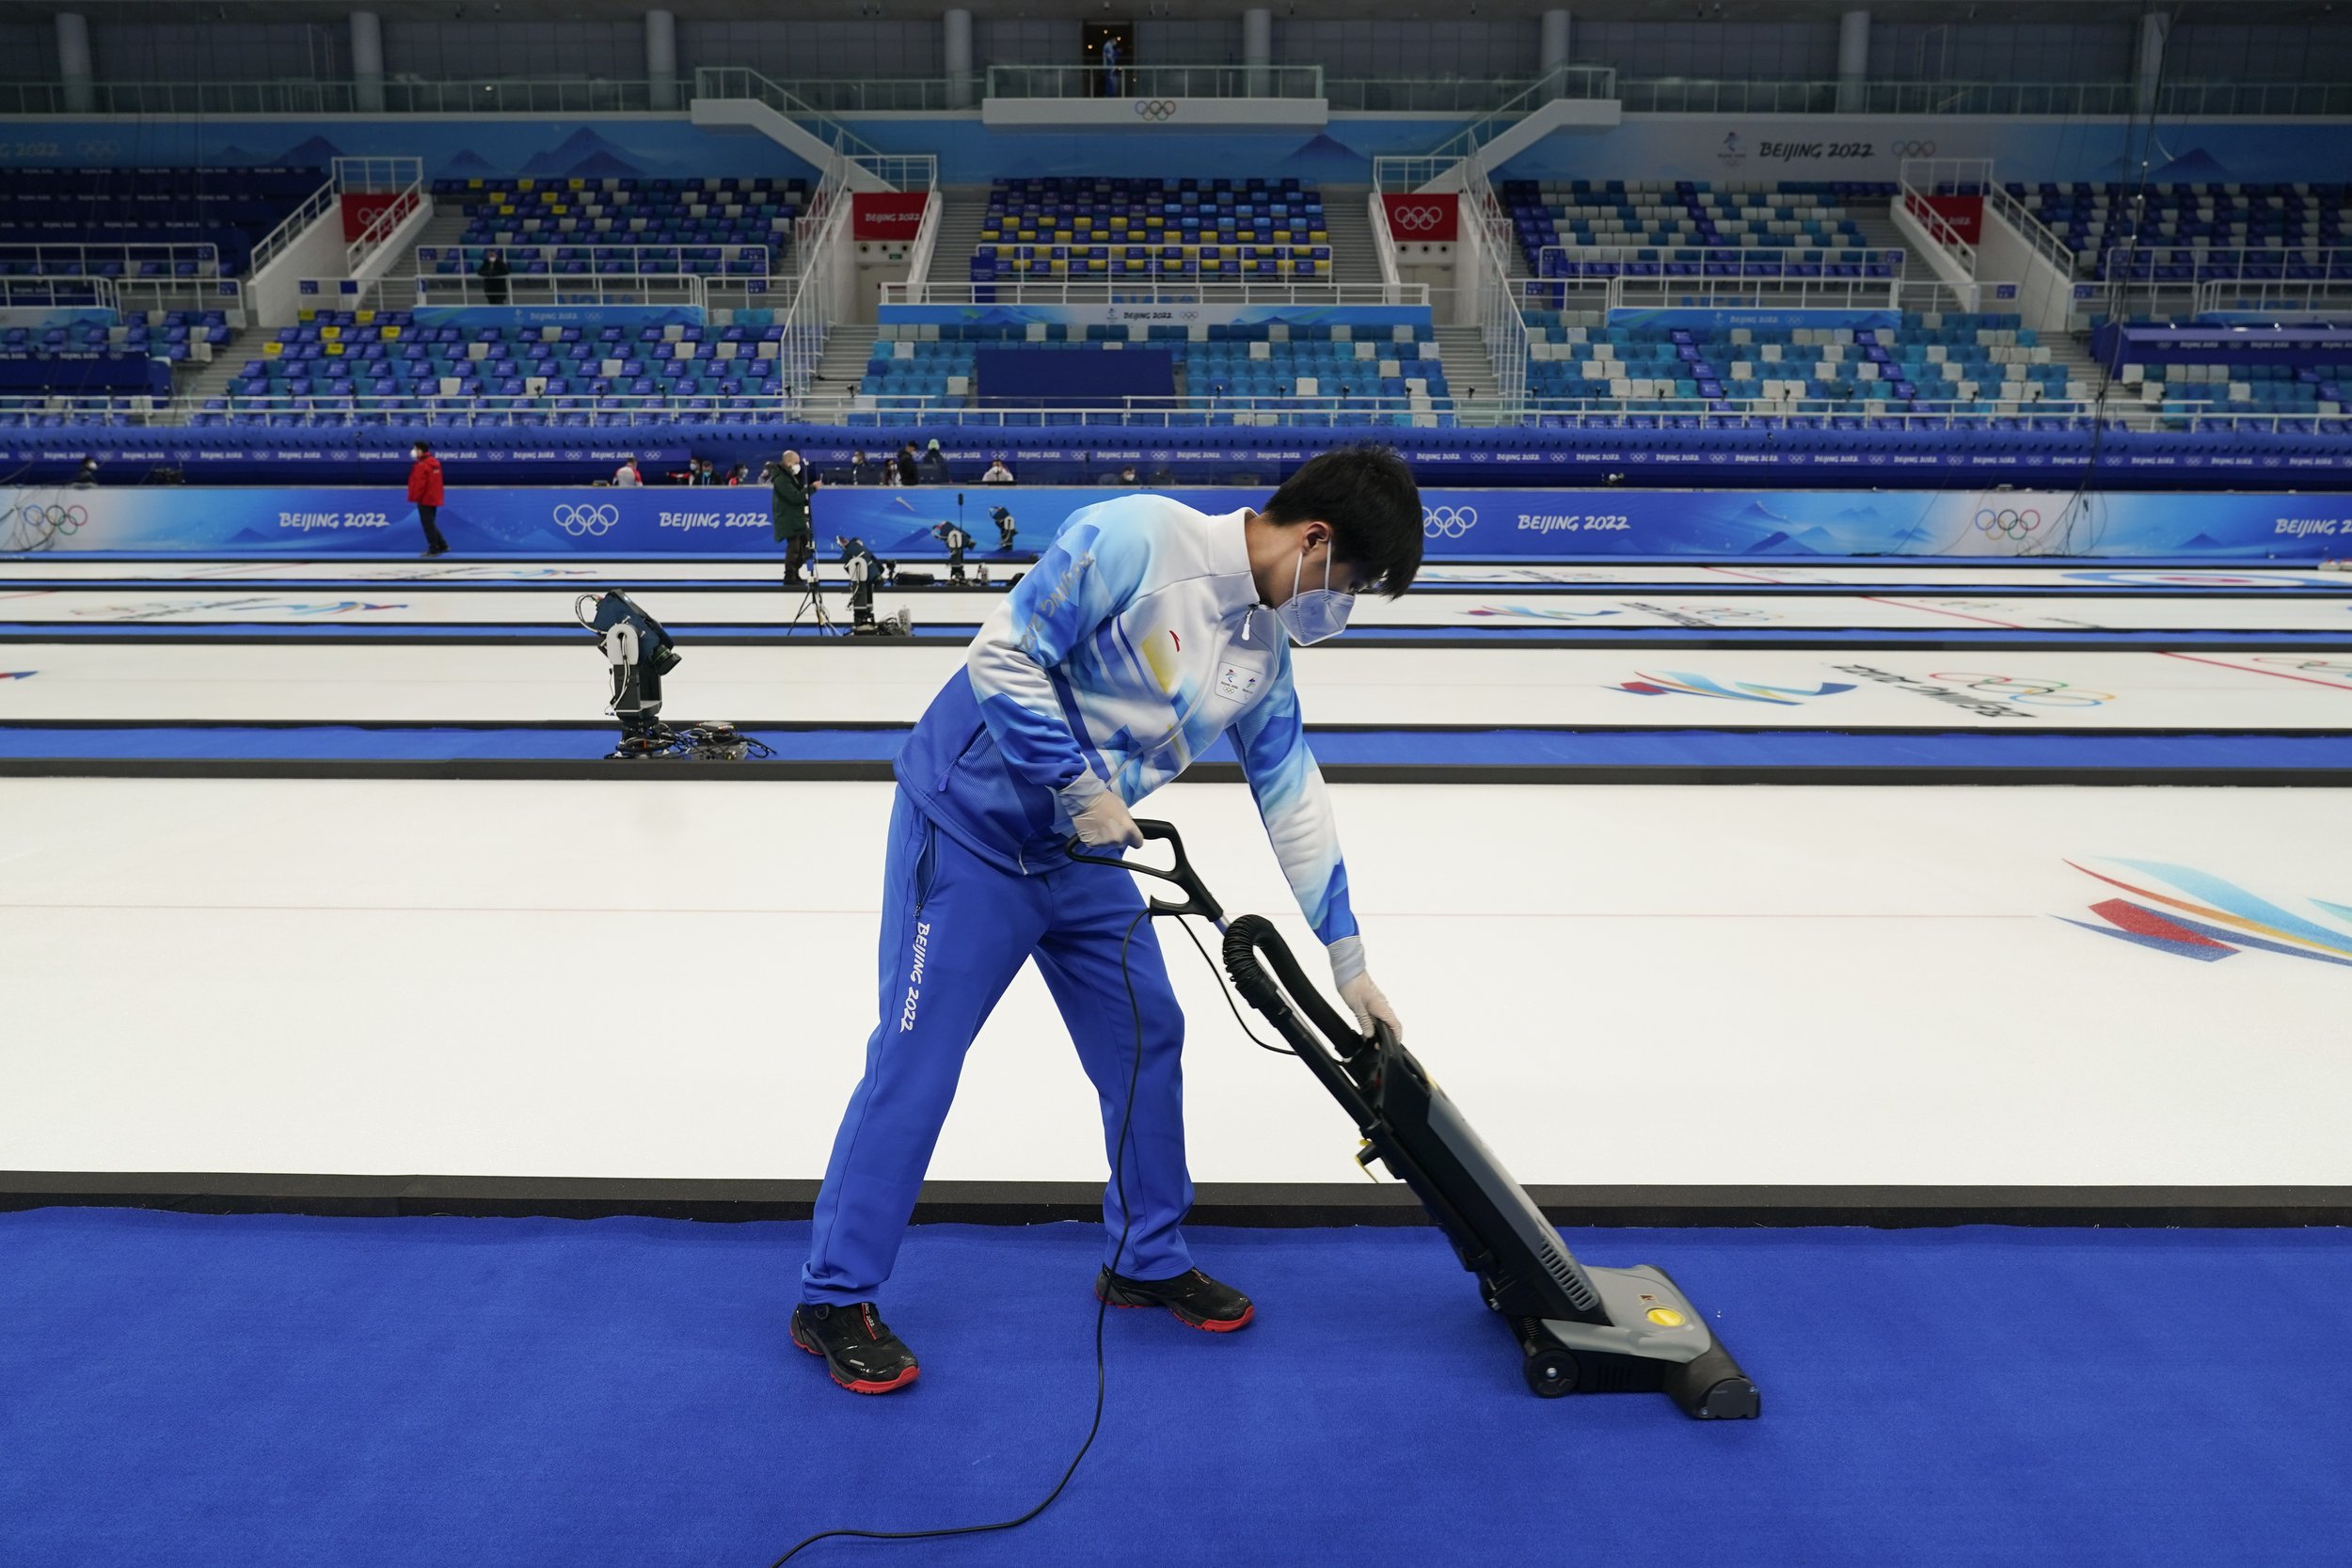  A volunteer vacuums the floor at the National Aquatics Center, a venue for curling events at the 2022 Winter Olympics, Saturday, Jan. 29, 2022, in Beijing. (AP Photo/Jae C. Hong) 